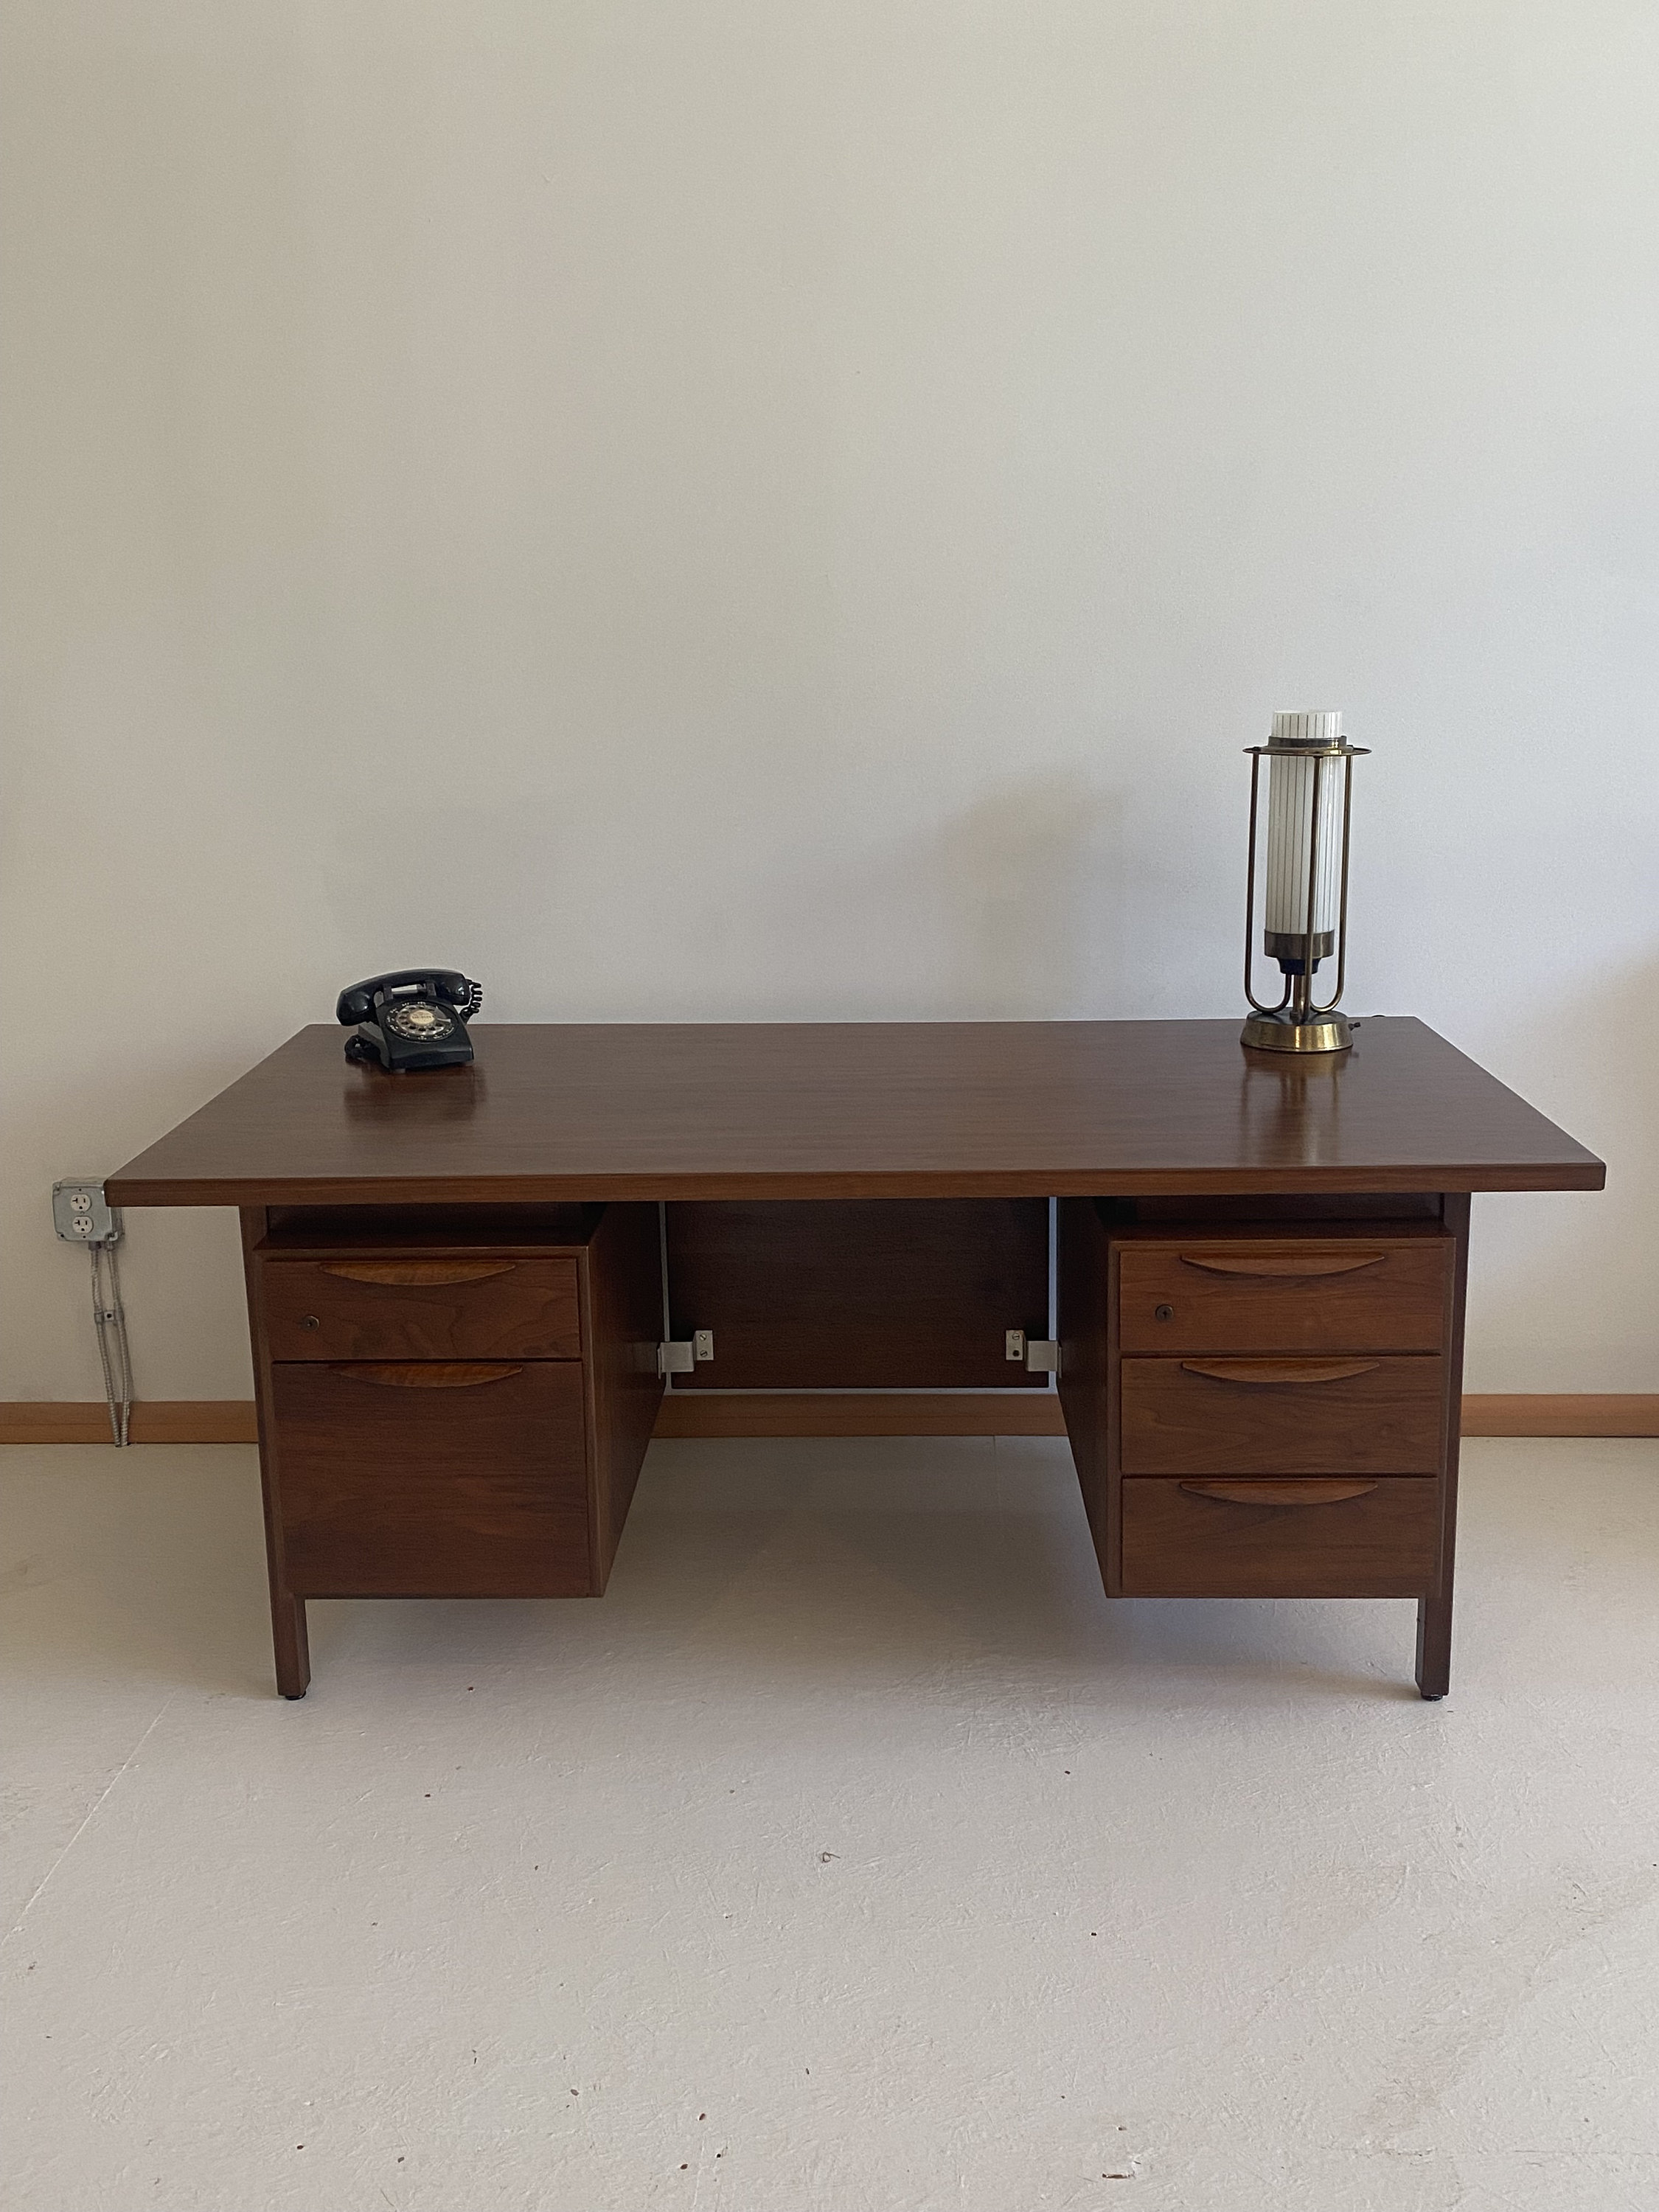 ukorua Mid Century Small Study Desk with Drawer/ 43 Cherry Desk/Modern Solid Wood Walnut Desk/ for Writing Home Computer Office with Open Storage Cub